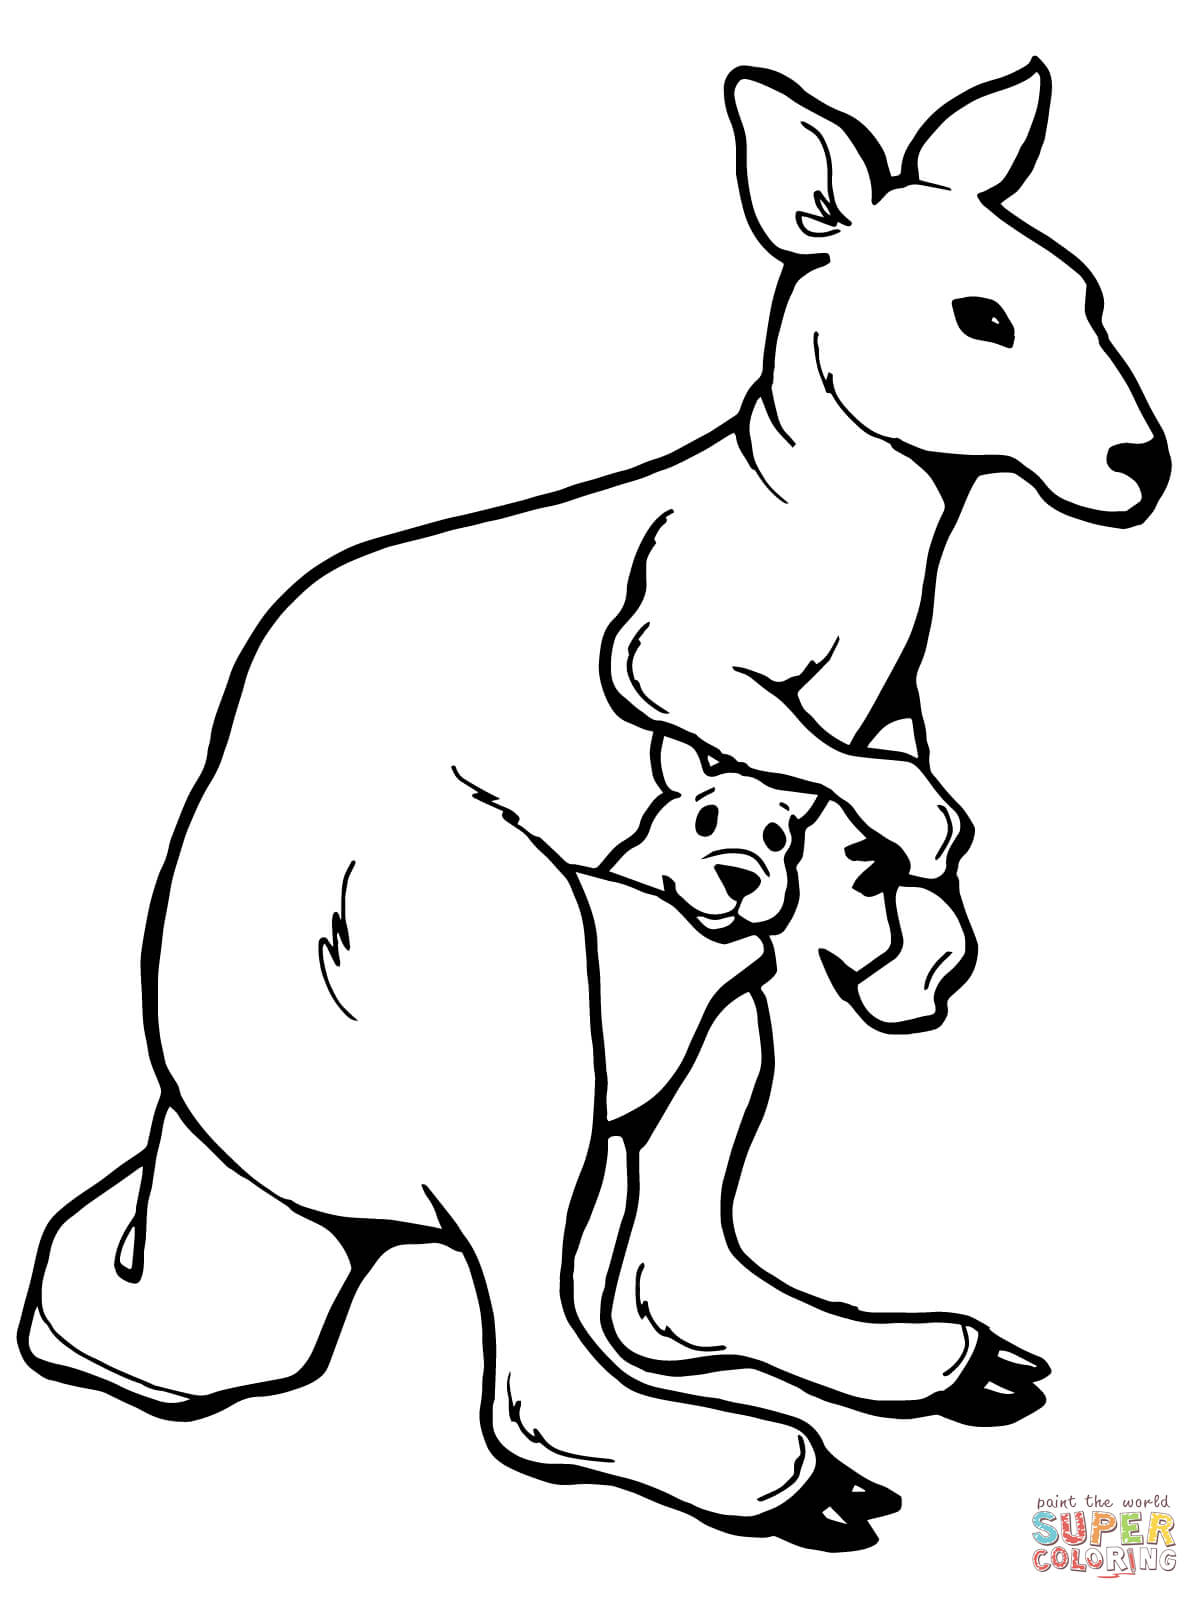 Kangaroo Color Page Kangaroos Coloring Pages Free Coloring Pages